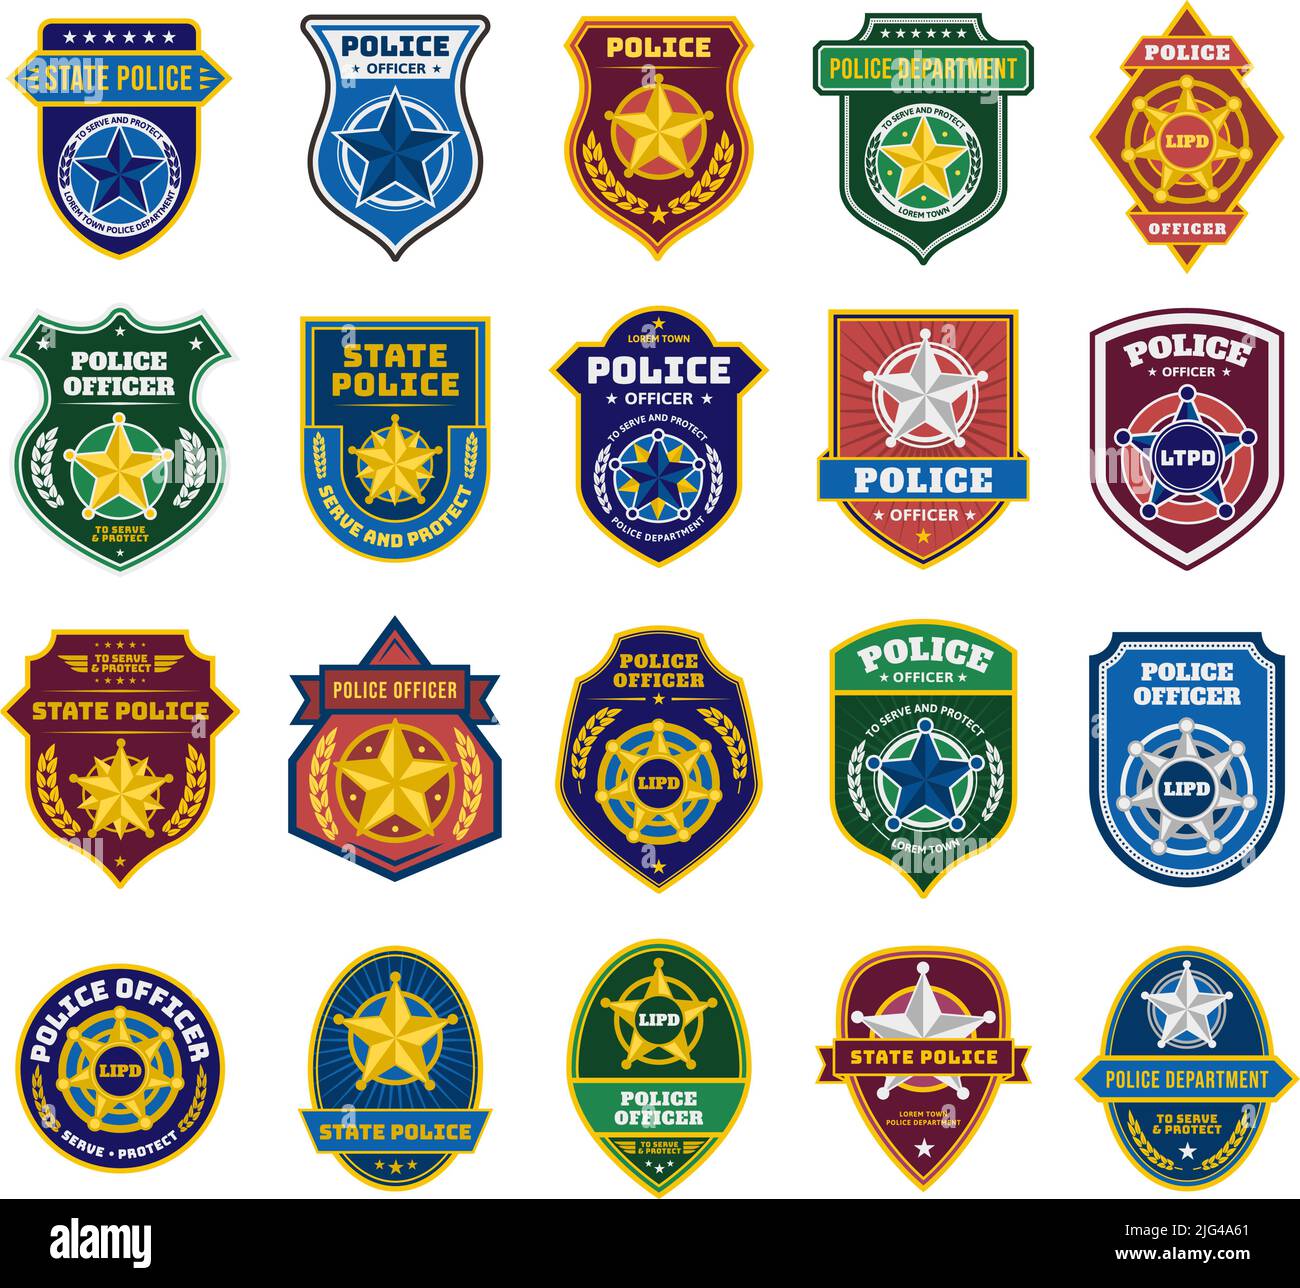 Police badges. Security officer and federal department signs, state policeman badge with star symbols vector set Stock Vector